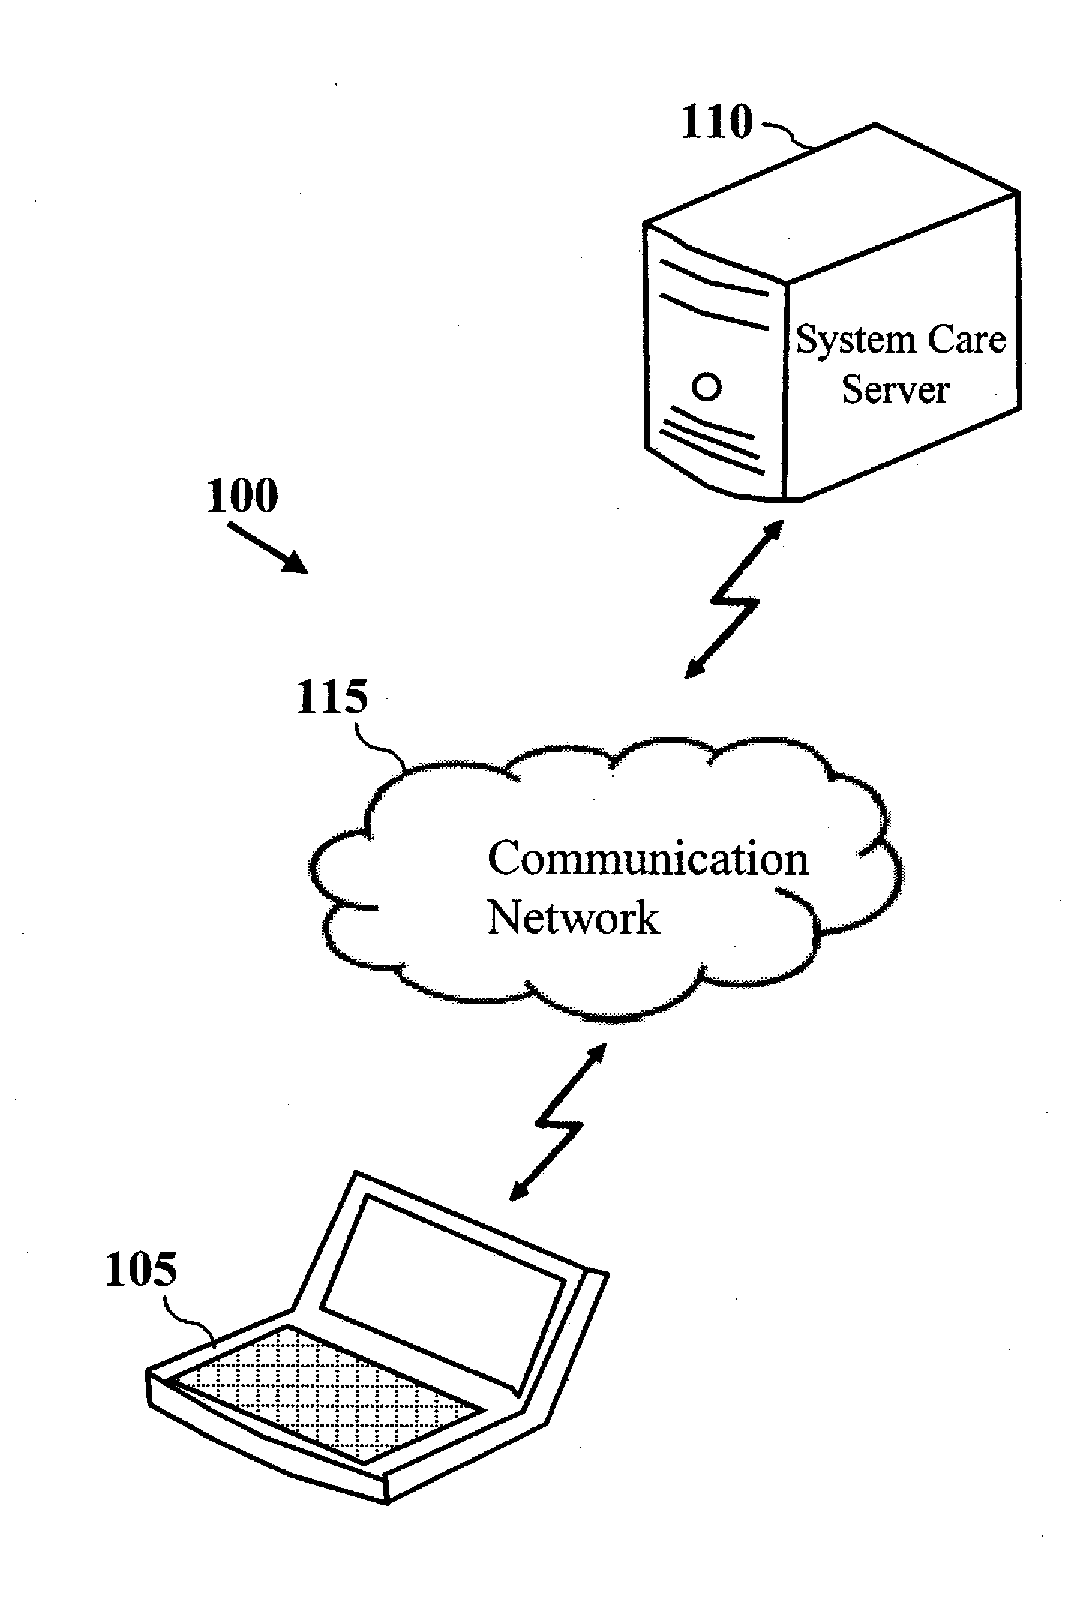 System health and performance care of computing devices